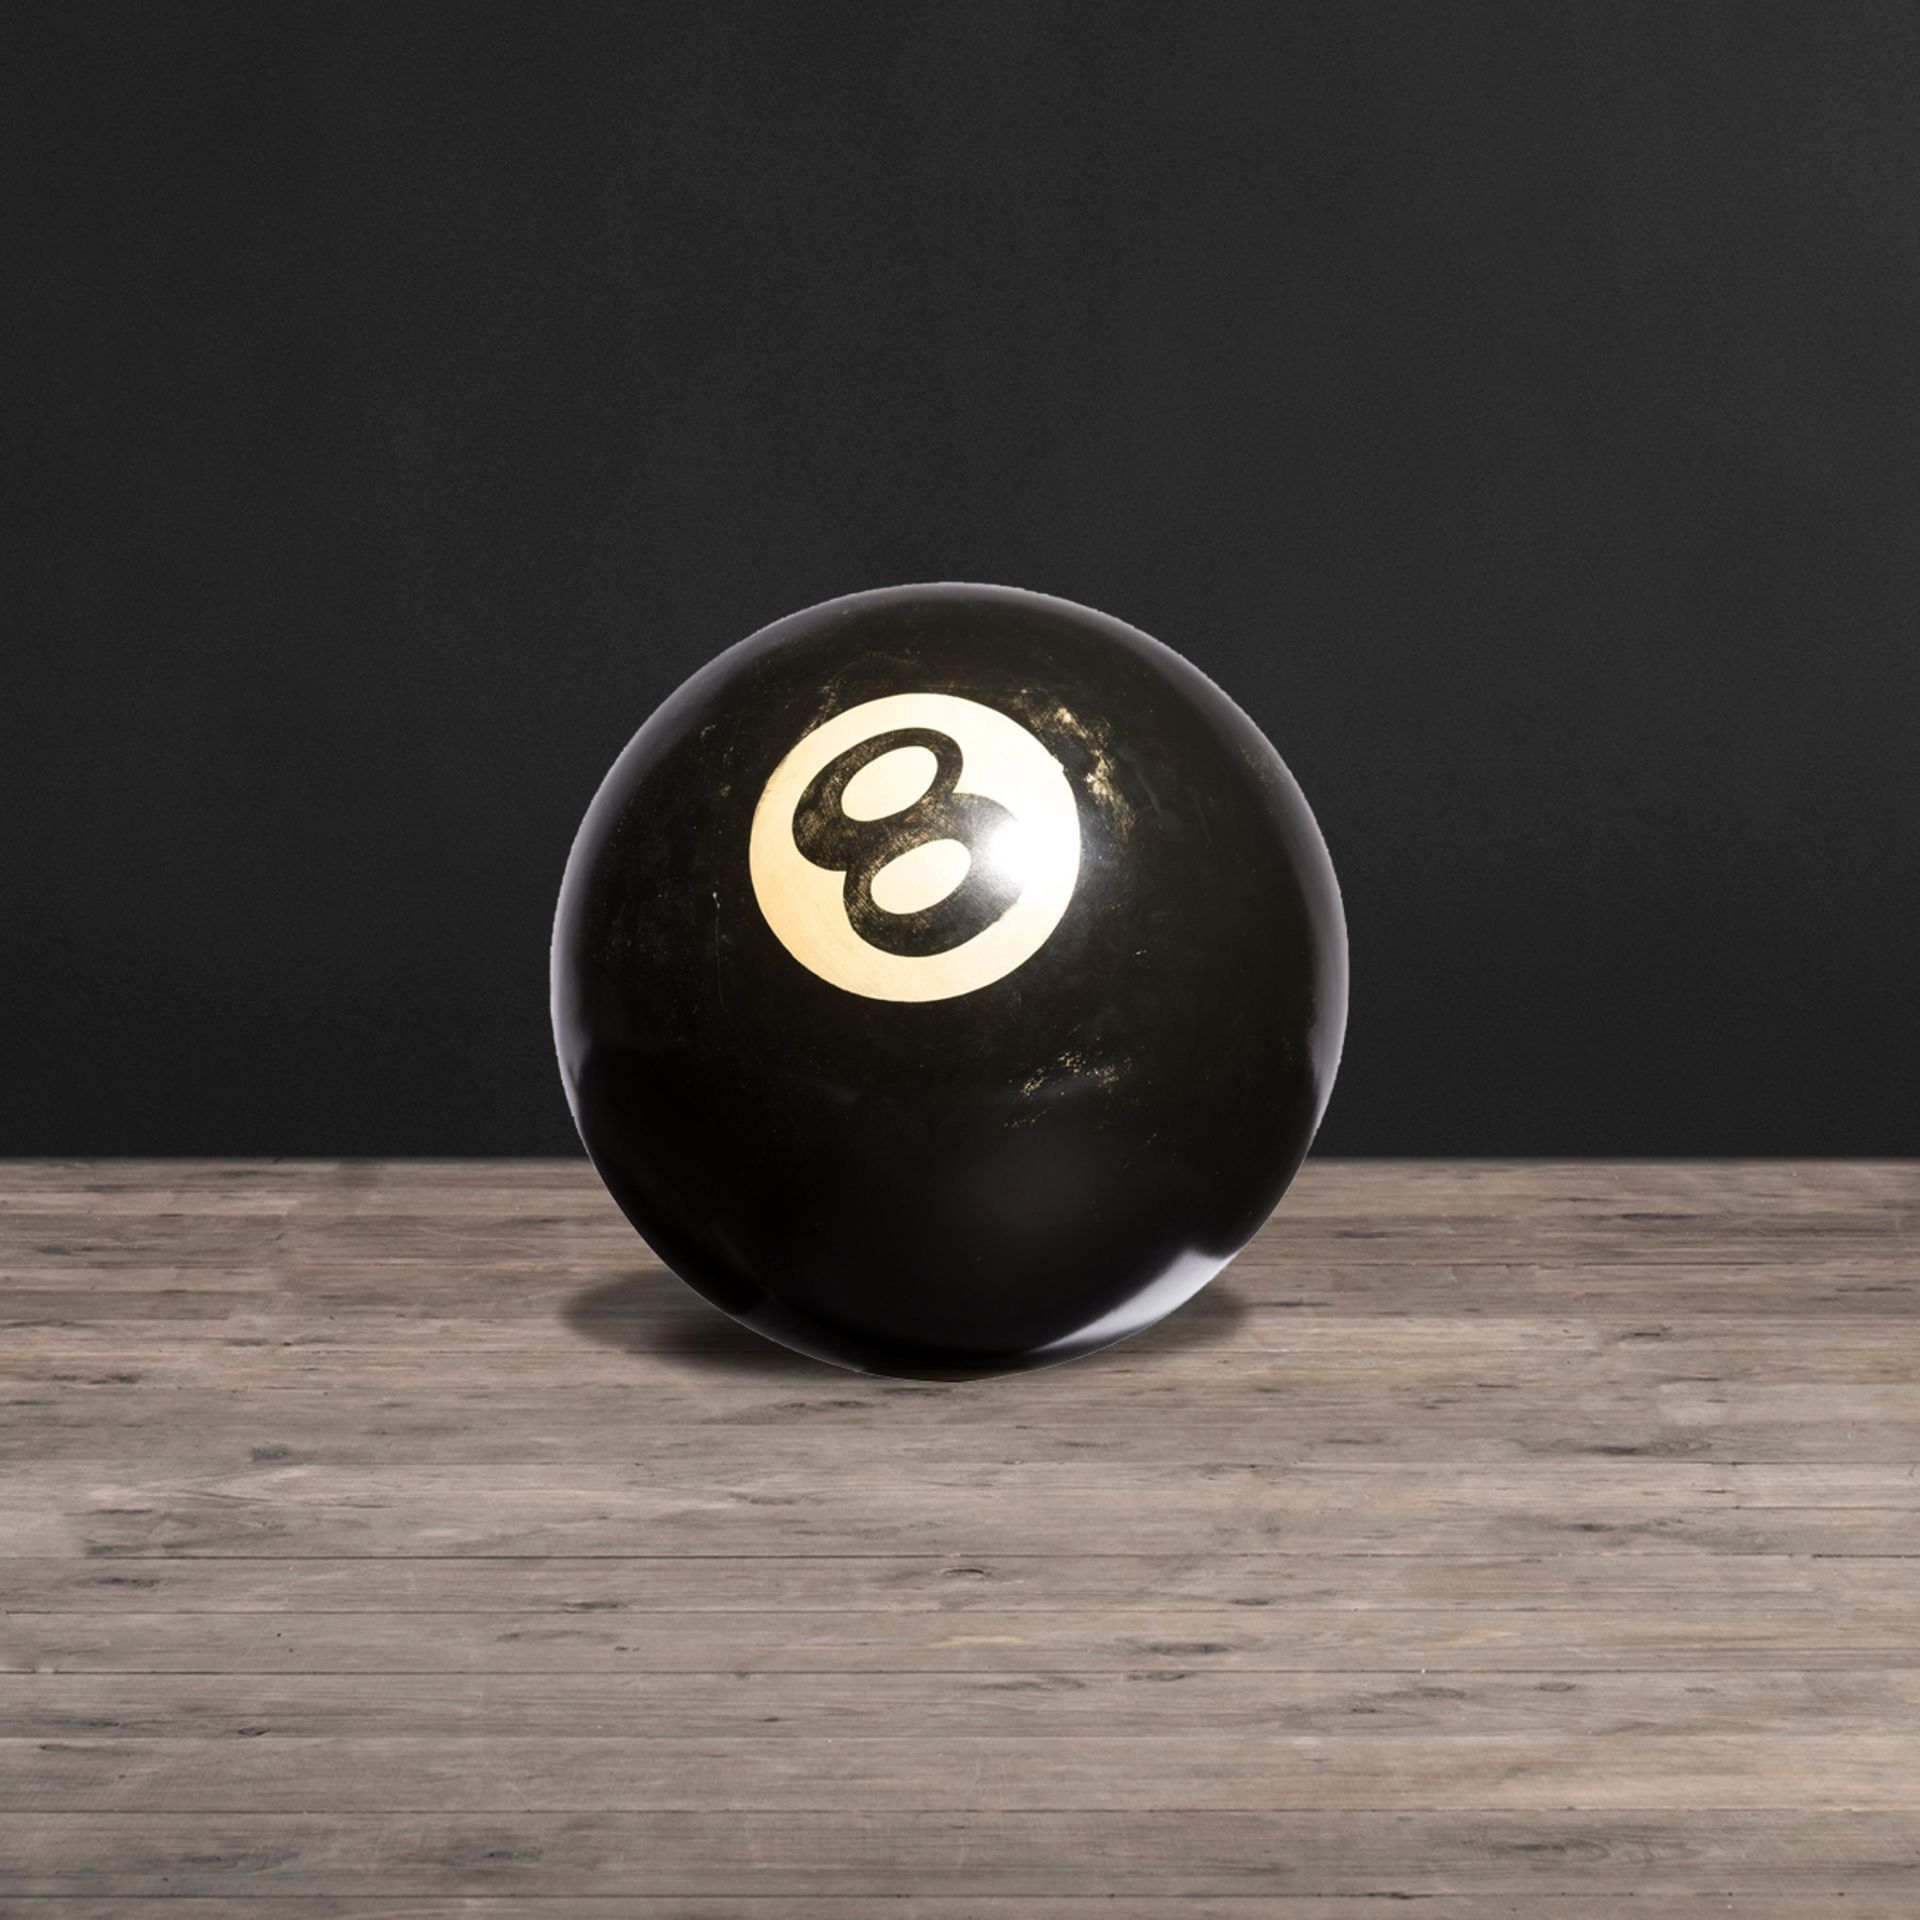 8 Ball Decoratie decor piece The 8 Ball decor piece from the top brand Timothy Oulton is modeled